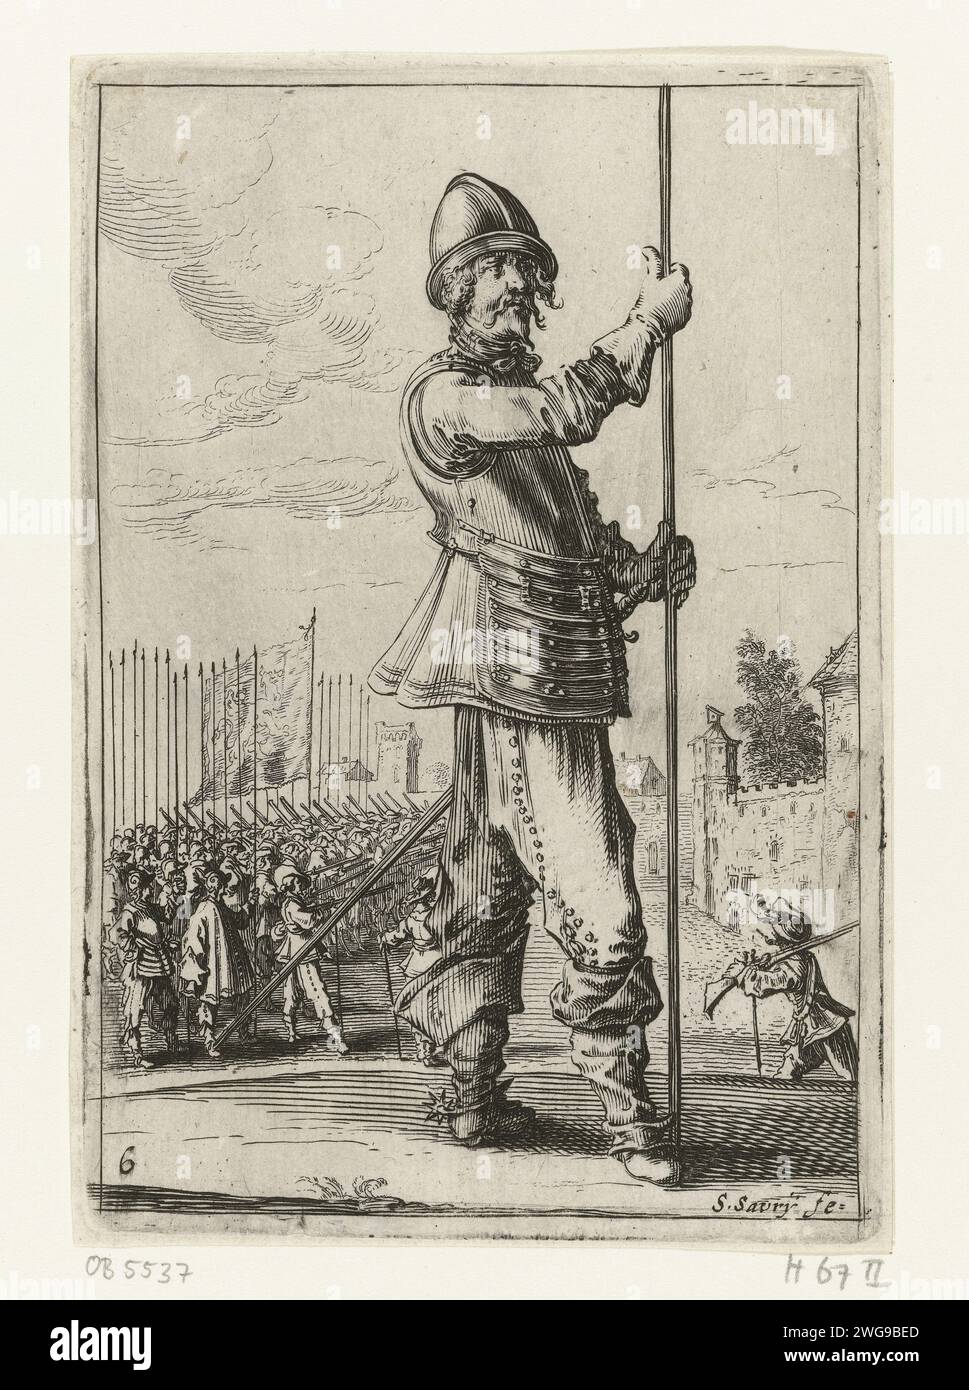 Standing soldier with Speer, Salomon Savery, After Pieter Jansz Quast, 1630 - 1665  Soldier with spear, in the background the infantry with standard bearer. The print is part of a ten-part series with performances of armed officers and soldiers, dressed according to Dutch fashion ca. 1625-1635. Amsterdam paper etching / engraving clothes, costume (+ men's clothes). the soldier; the soldier's life. helved weapons, polearms (for striking, hacking, thrusting): pike. land forces (+ infantry) Stock Photo